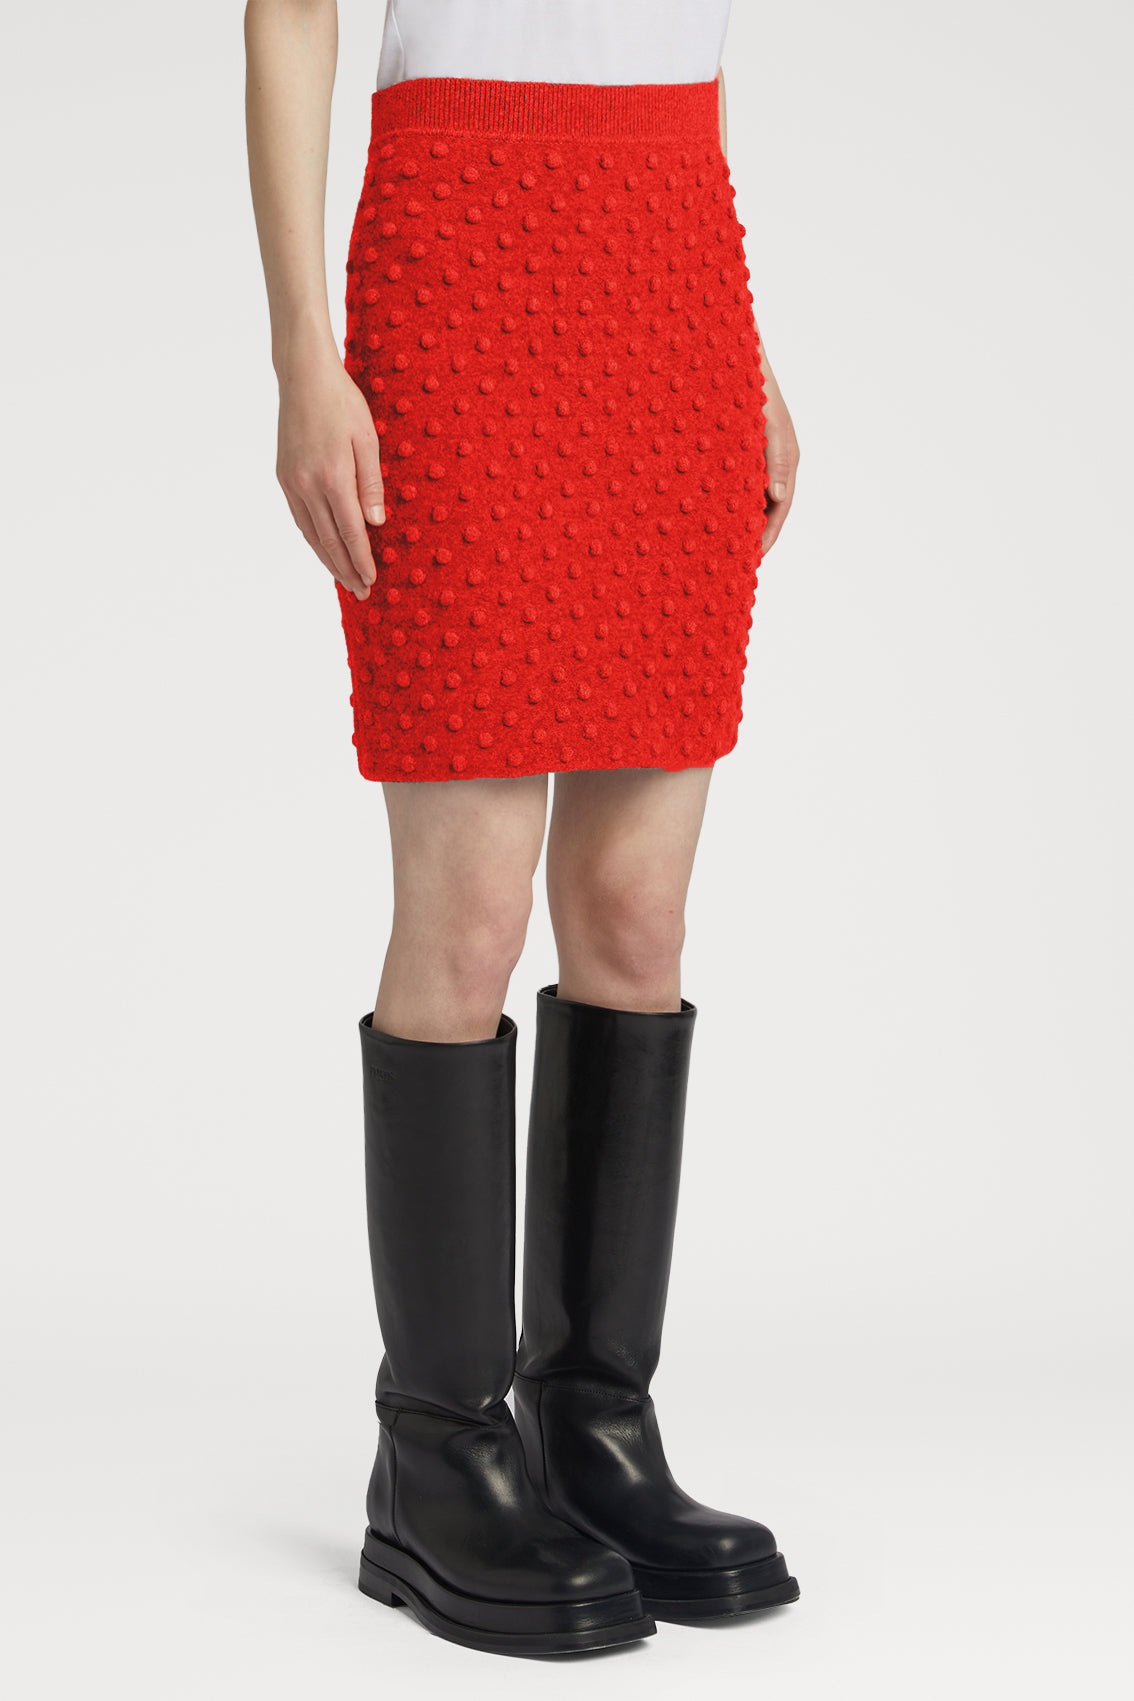 Felted Bubble Knitted Mini Skirt in Fire Red